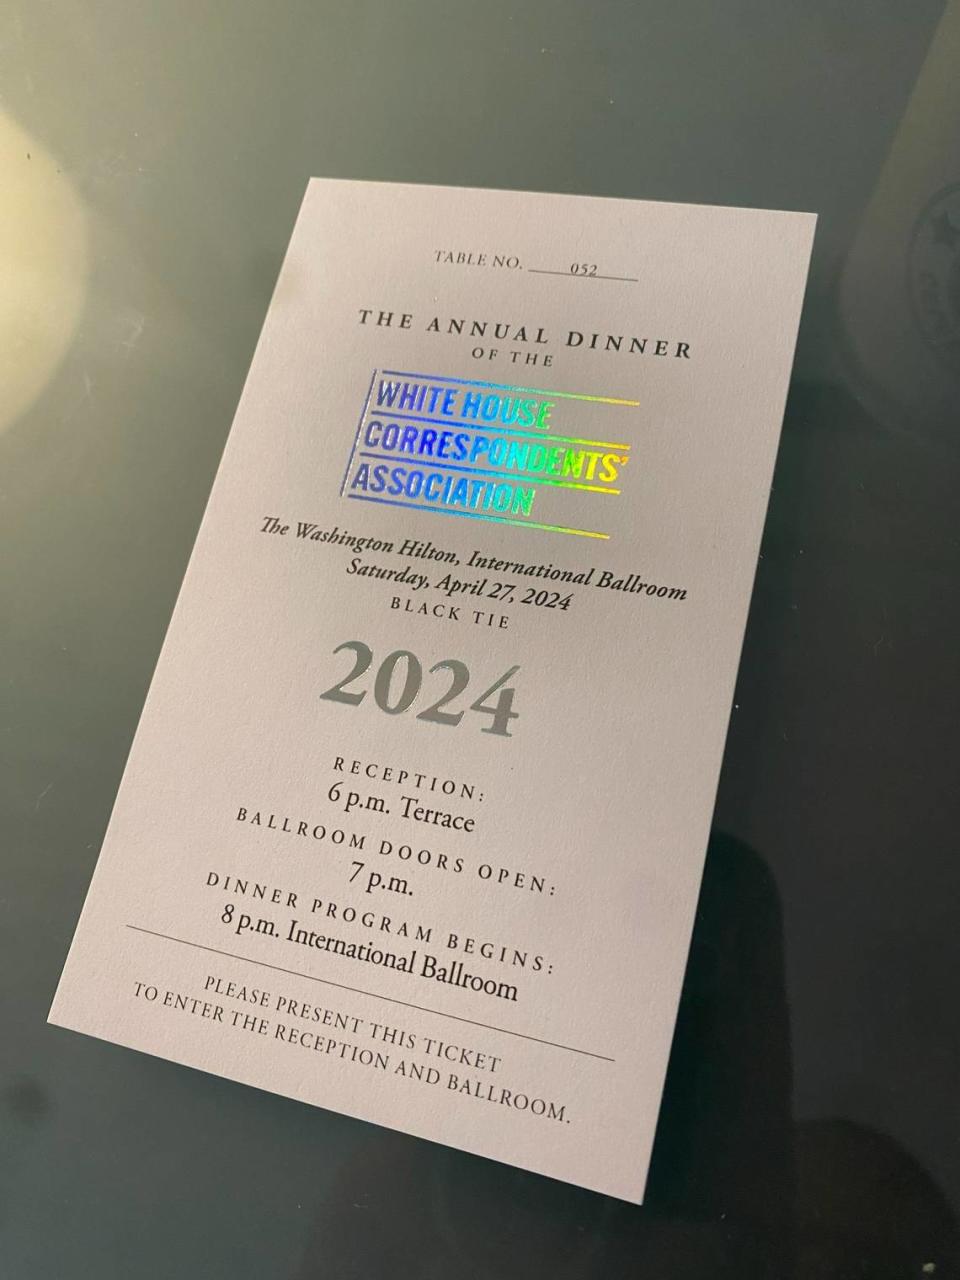 A ticket for the 2024 White House Correspondents’ Dinner.